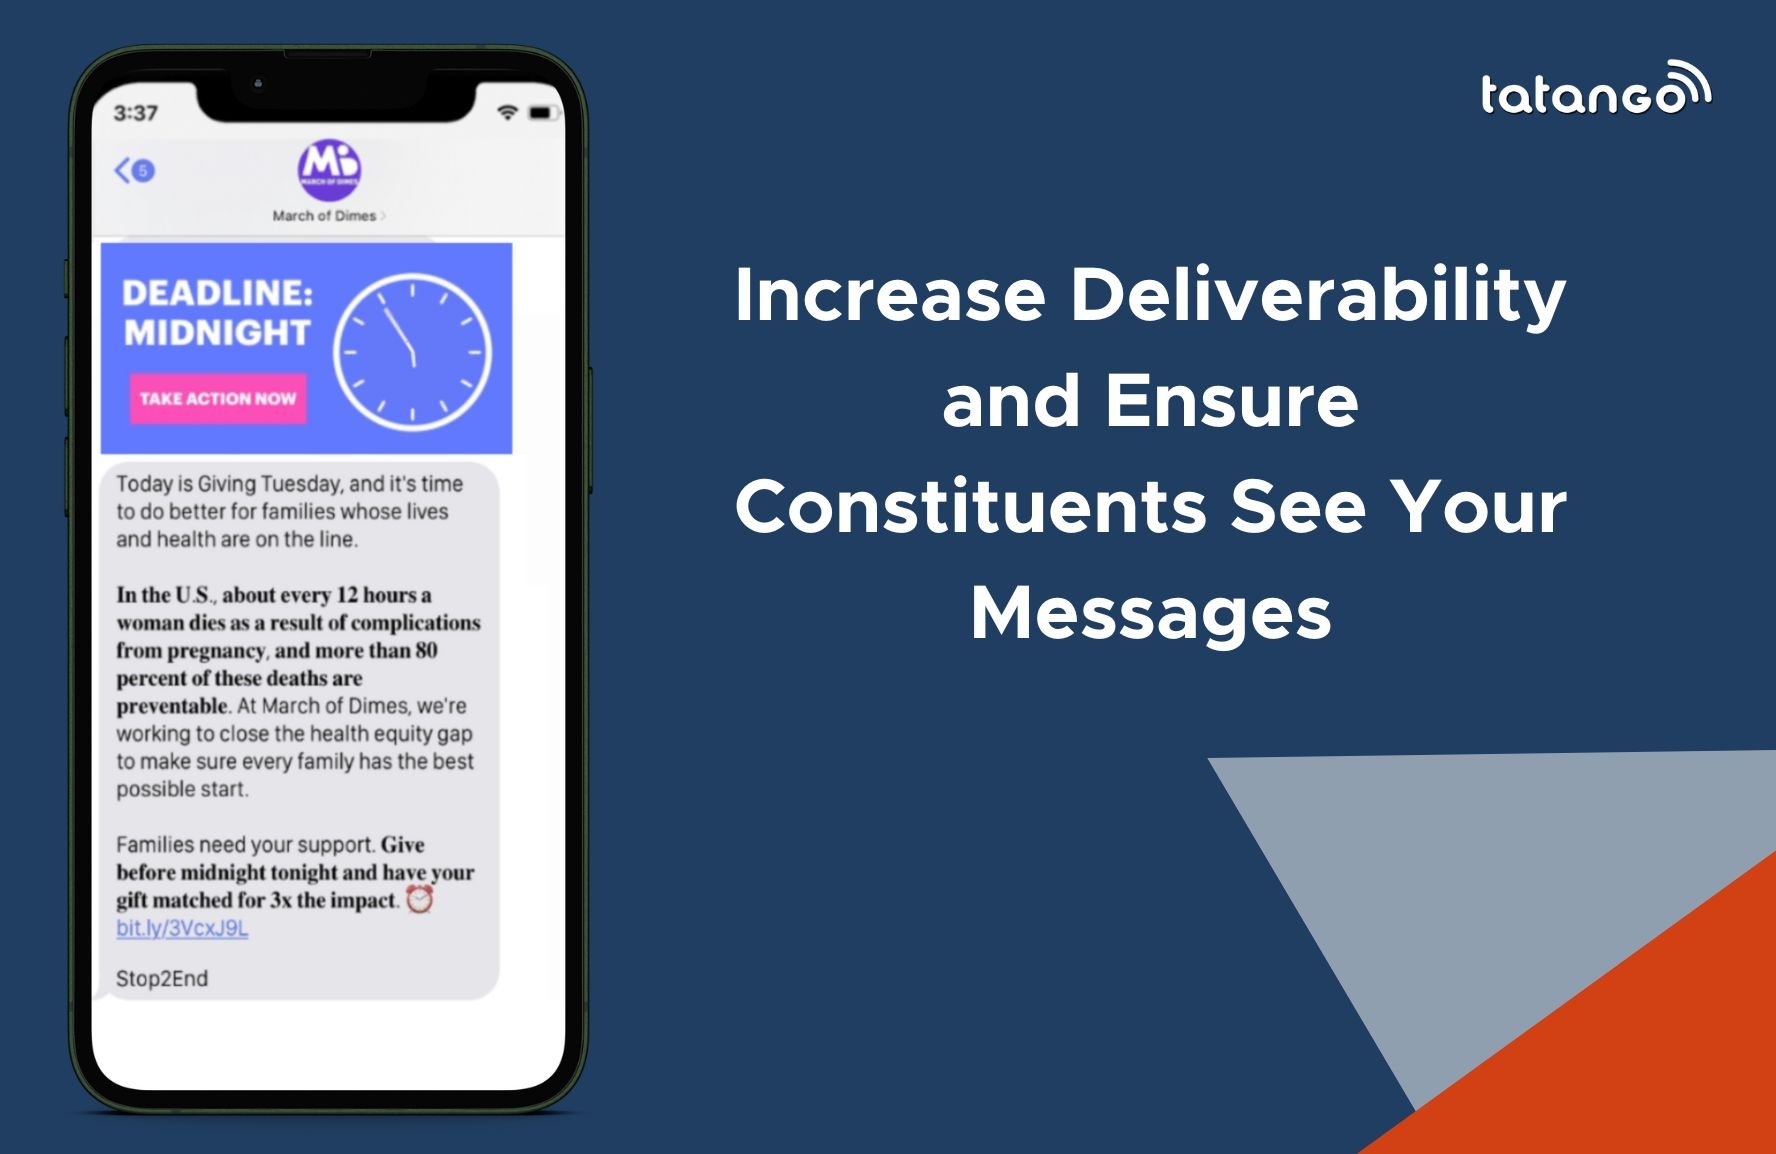 Increase Deliverability and Ensure Constituents See Your Messages